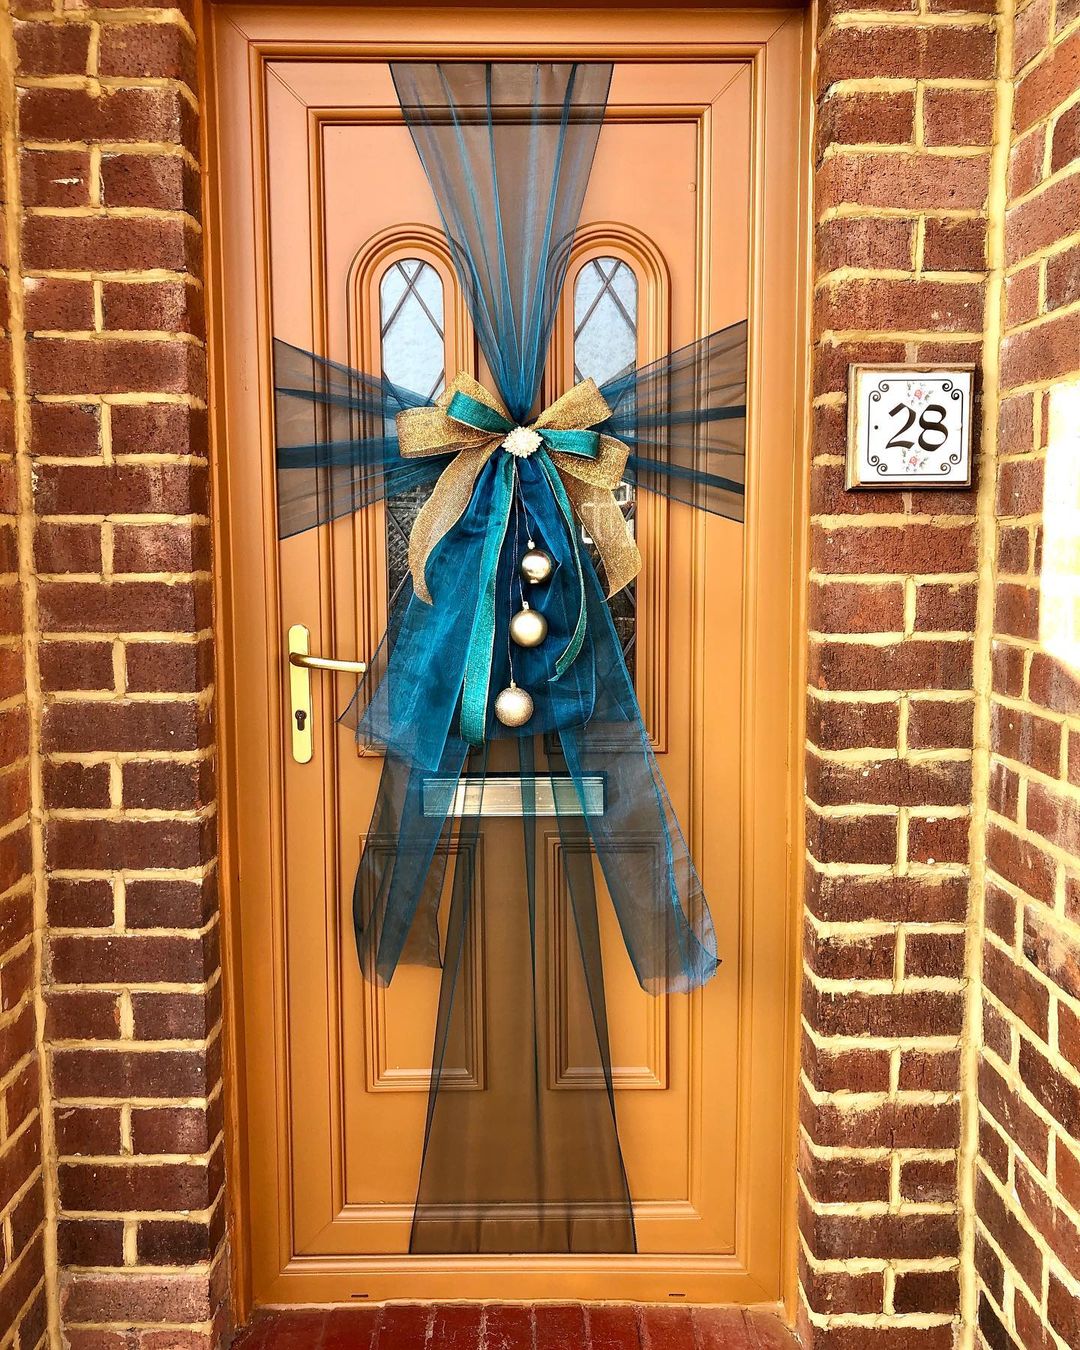 Large bows wrapping a front door with some gold ornaments hanging from the middle of the bow. Photo by Instagram user @flowersbyjemmaholmes.